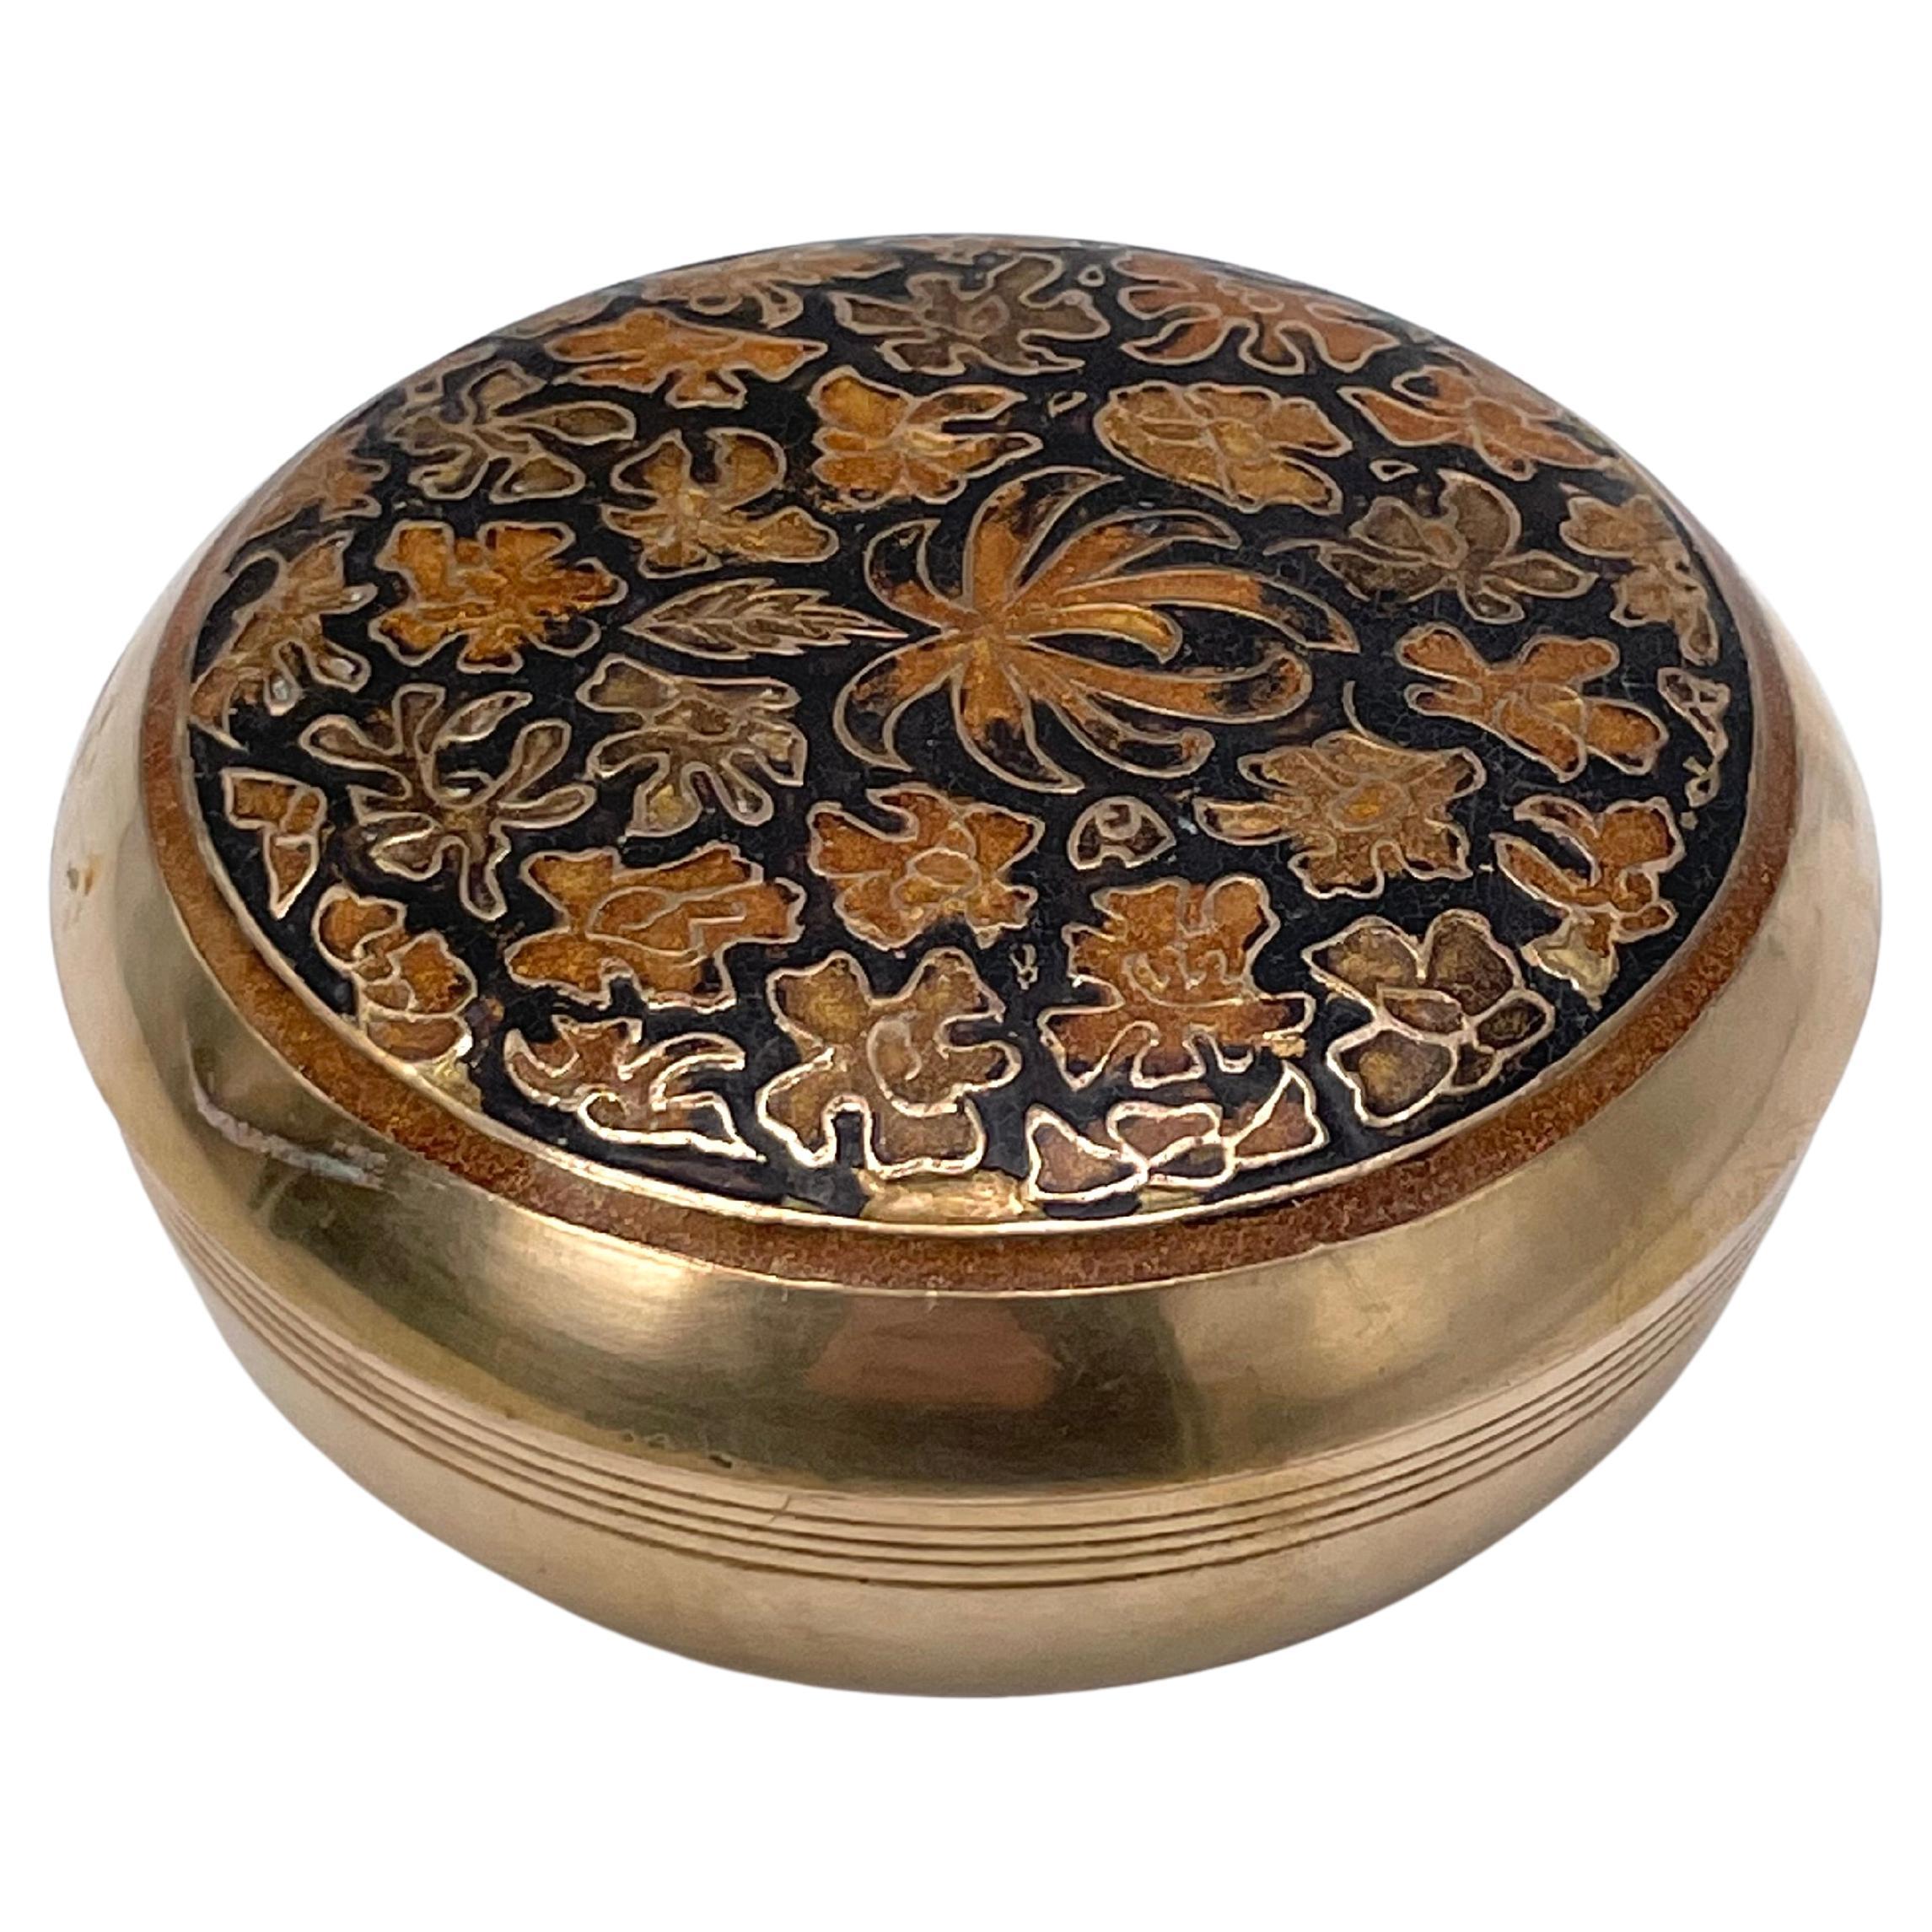 Jewerly, Decorative Brass Box, Old Patina, Pattern Flower, Gold Color France 1970 For Sale